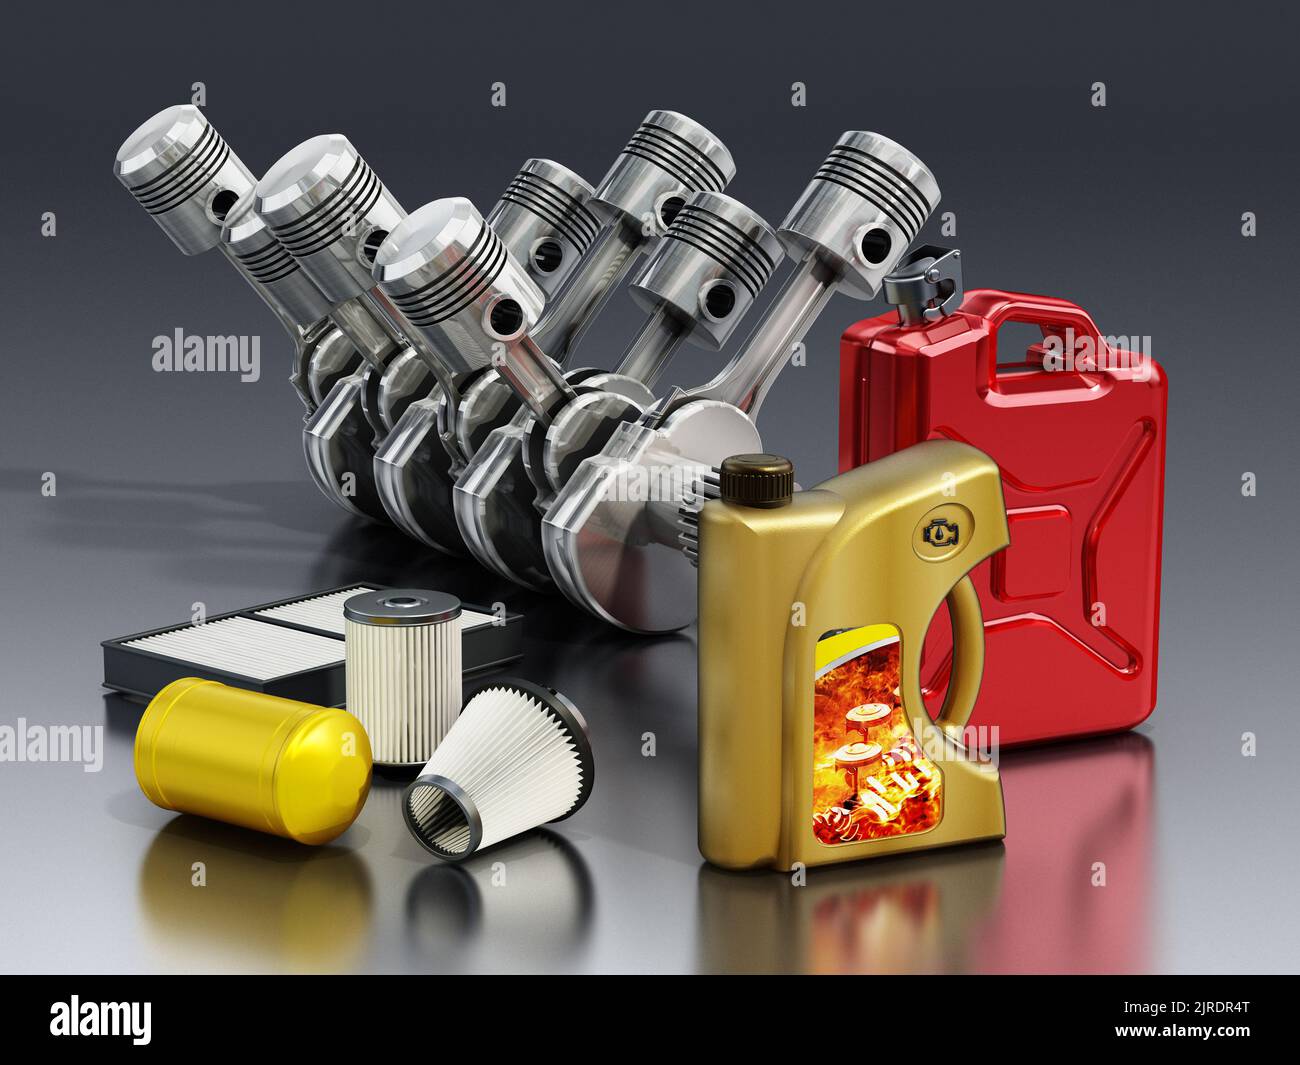 V6 engine, gas canister, oil bottle and spare filters. 3D illustration. Stock Photo